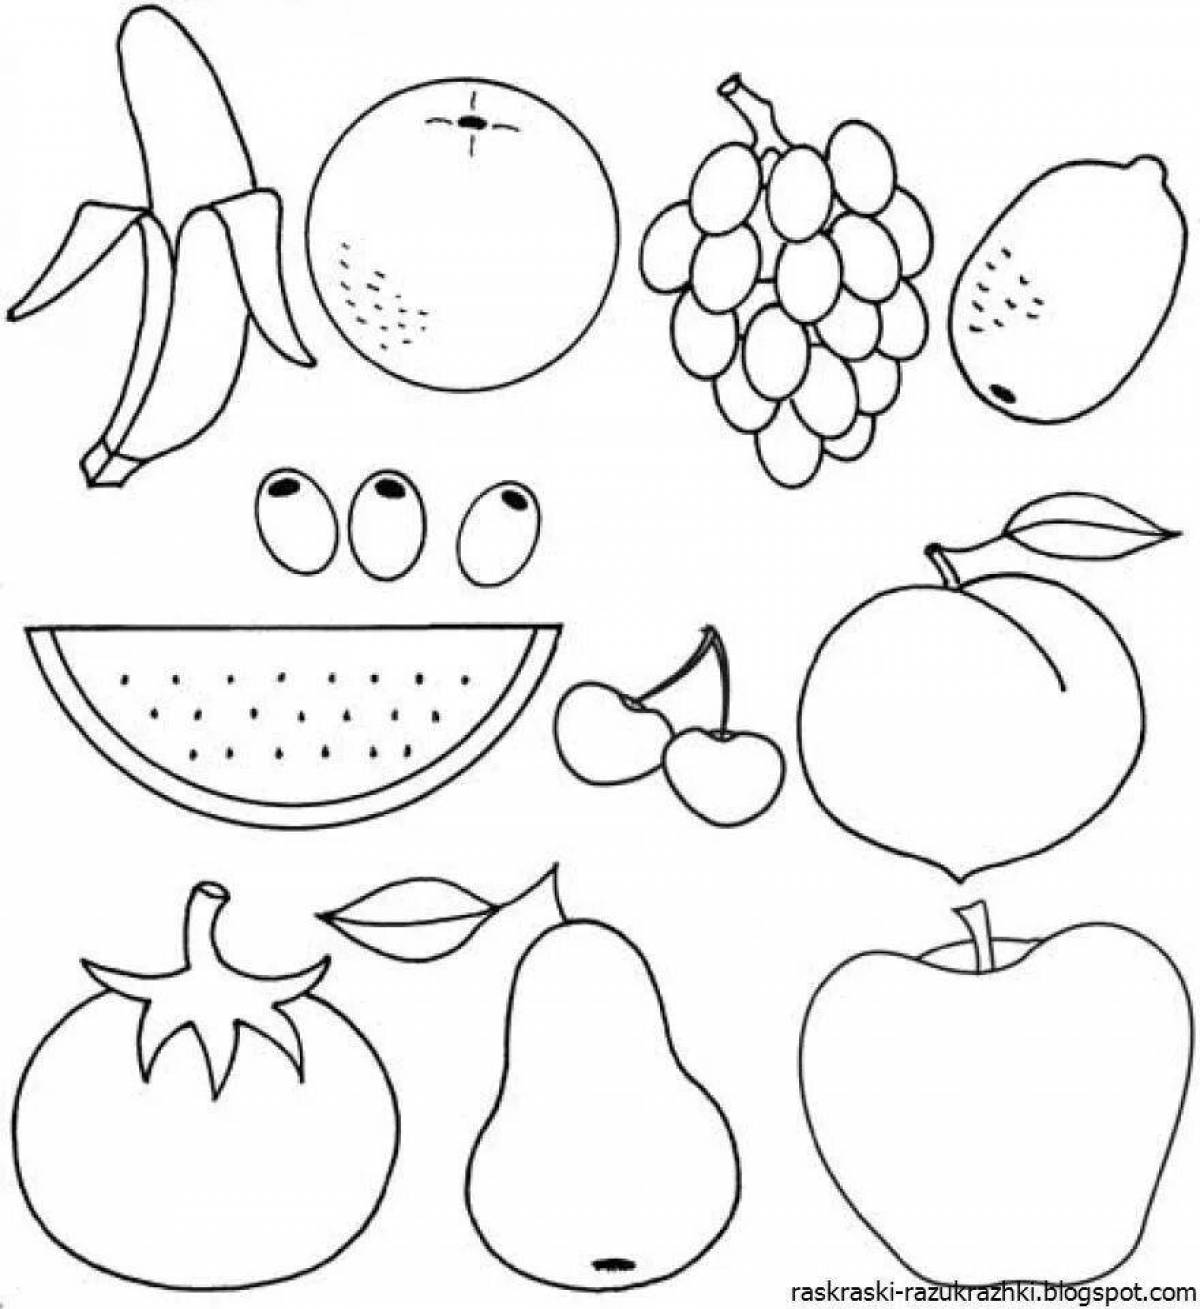 Creative fruit coloring book for 6-7 year olds